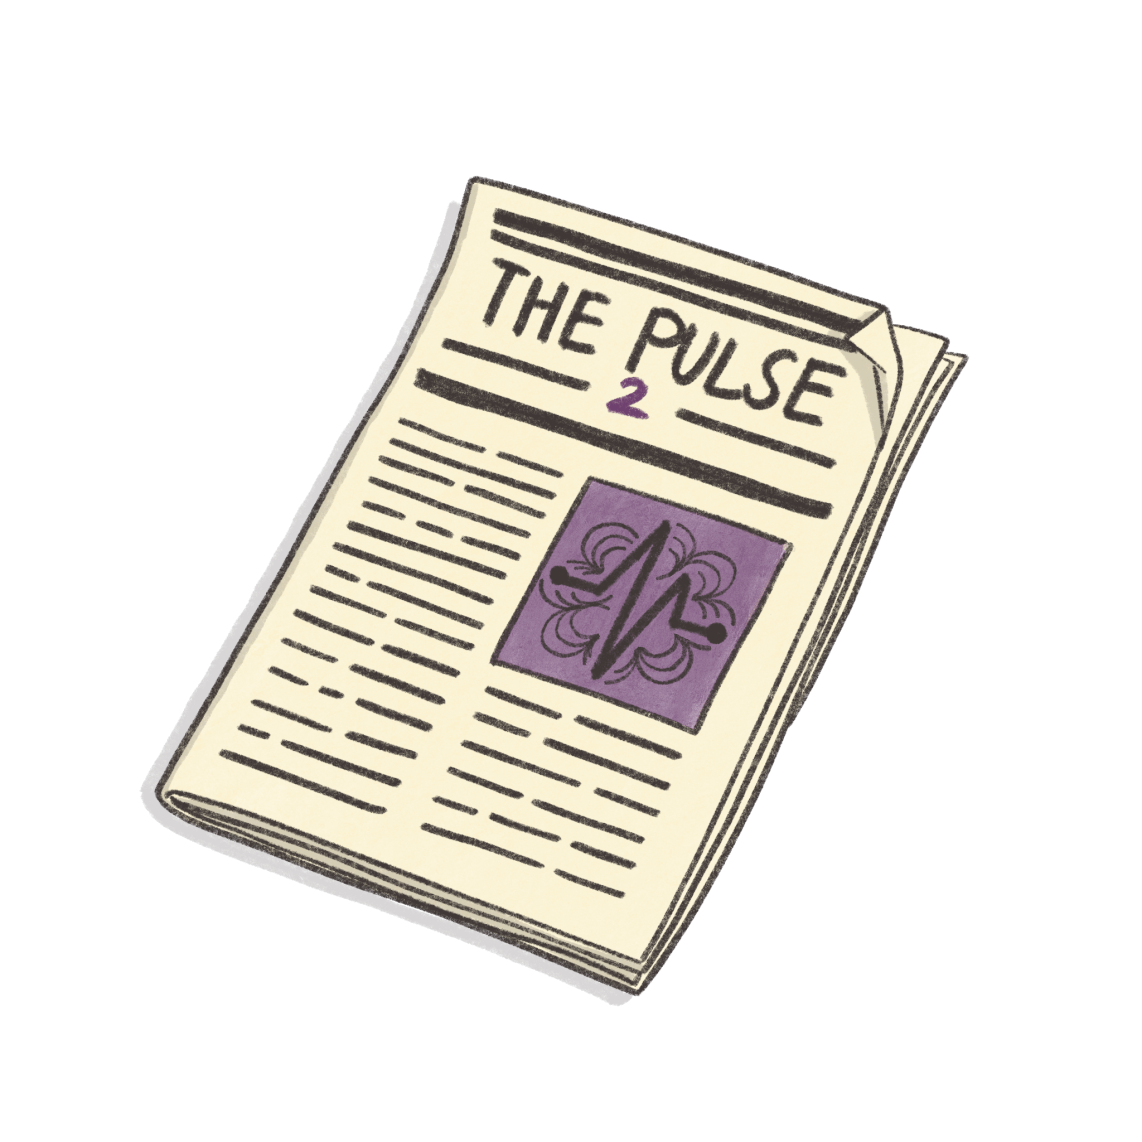 The Apoio Pulse – Issue Two image